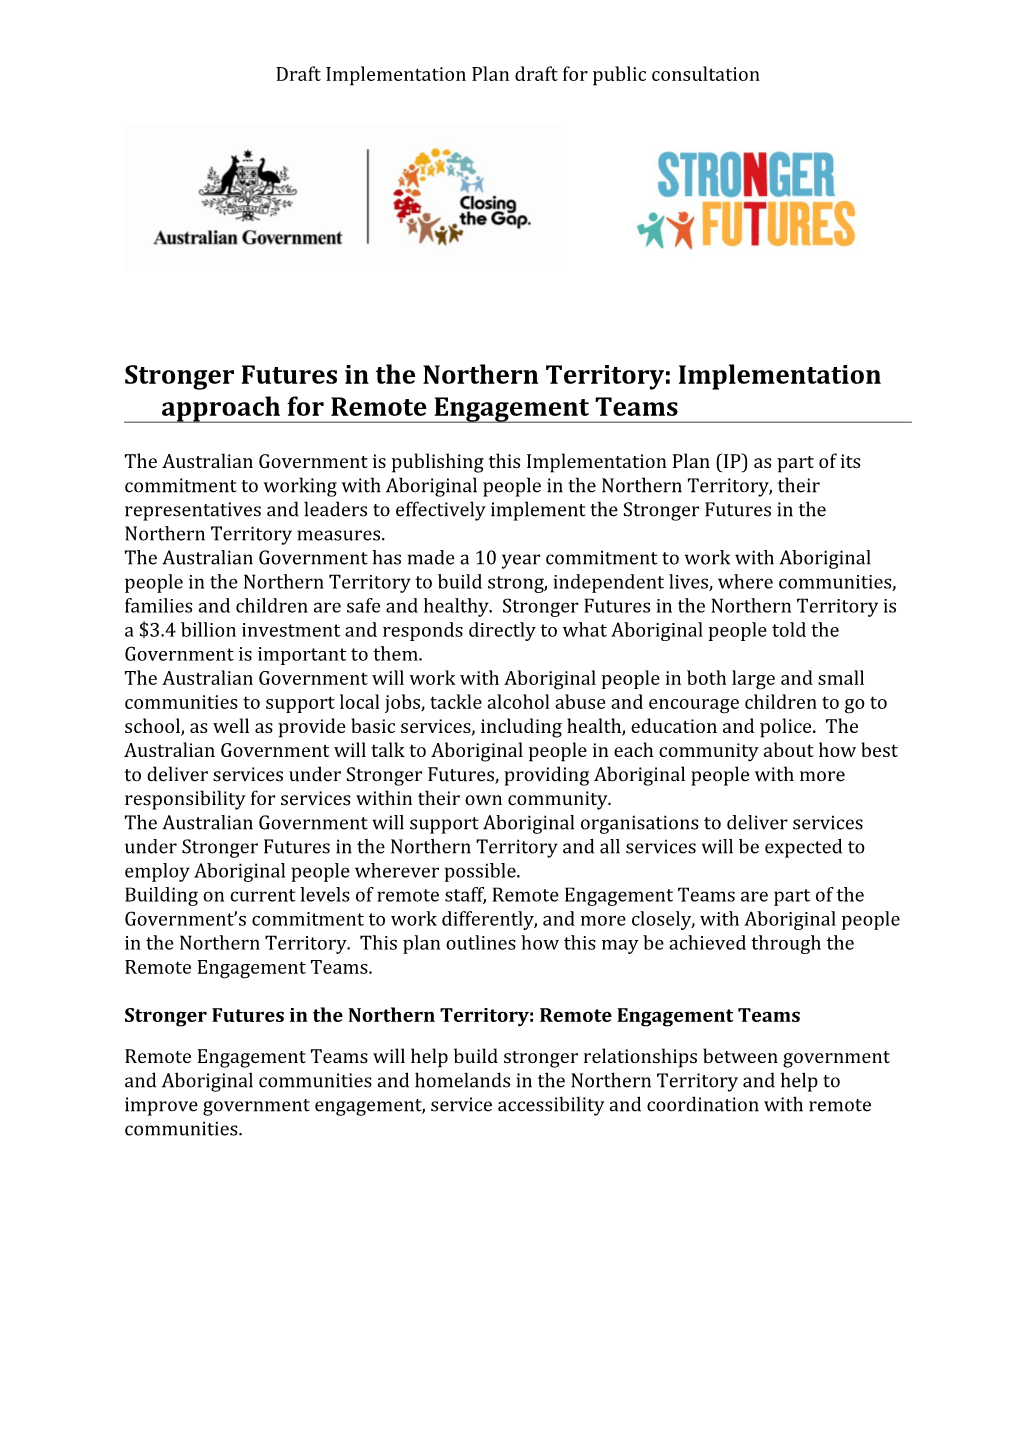 Stronger Futures in the Northern Territory: Impementation Approch for Remote Engagaement Teams